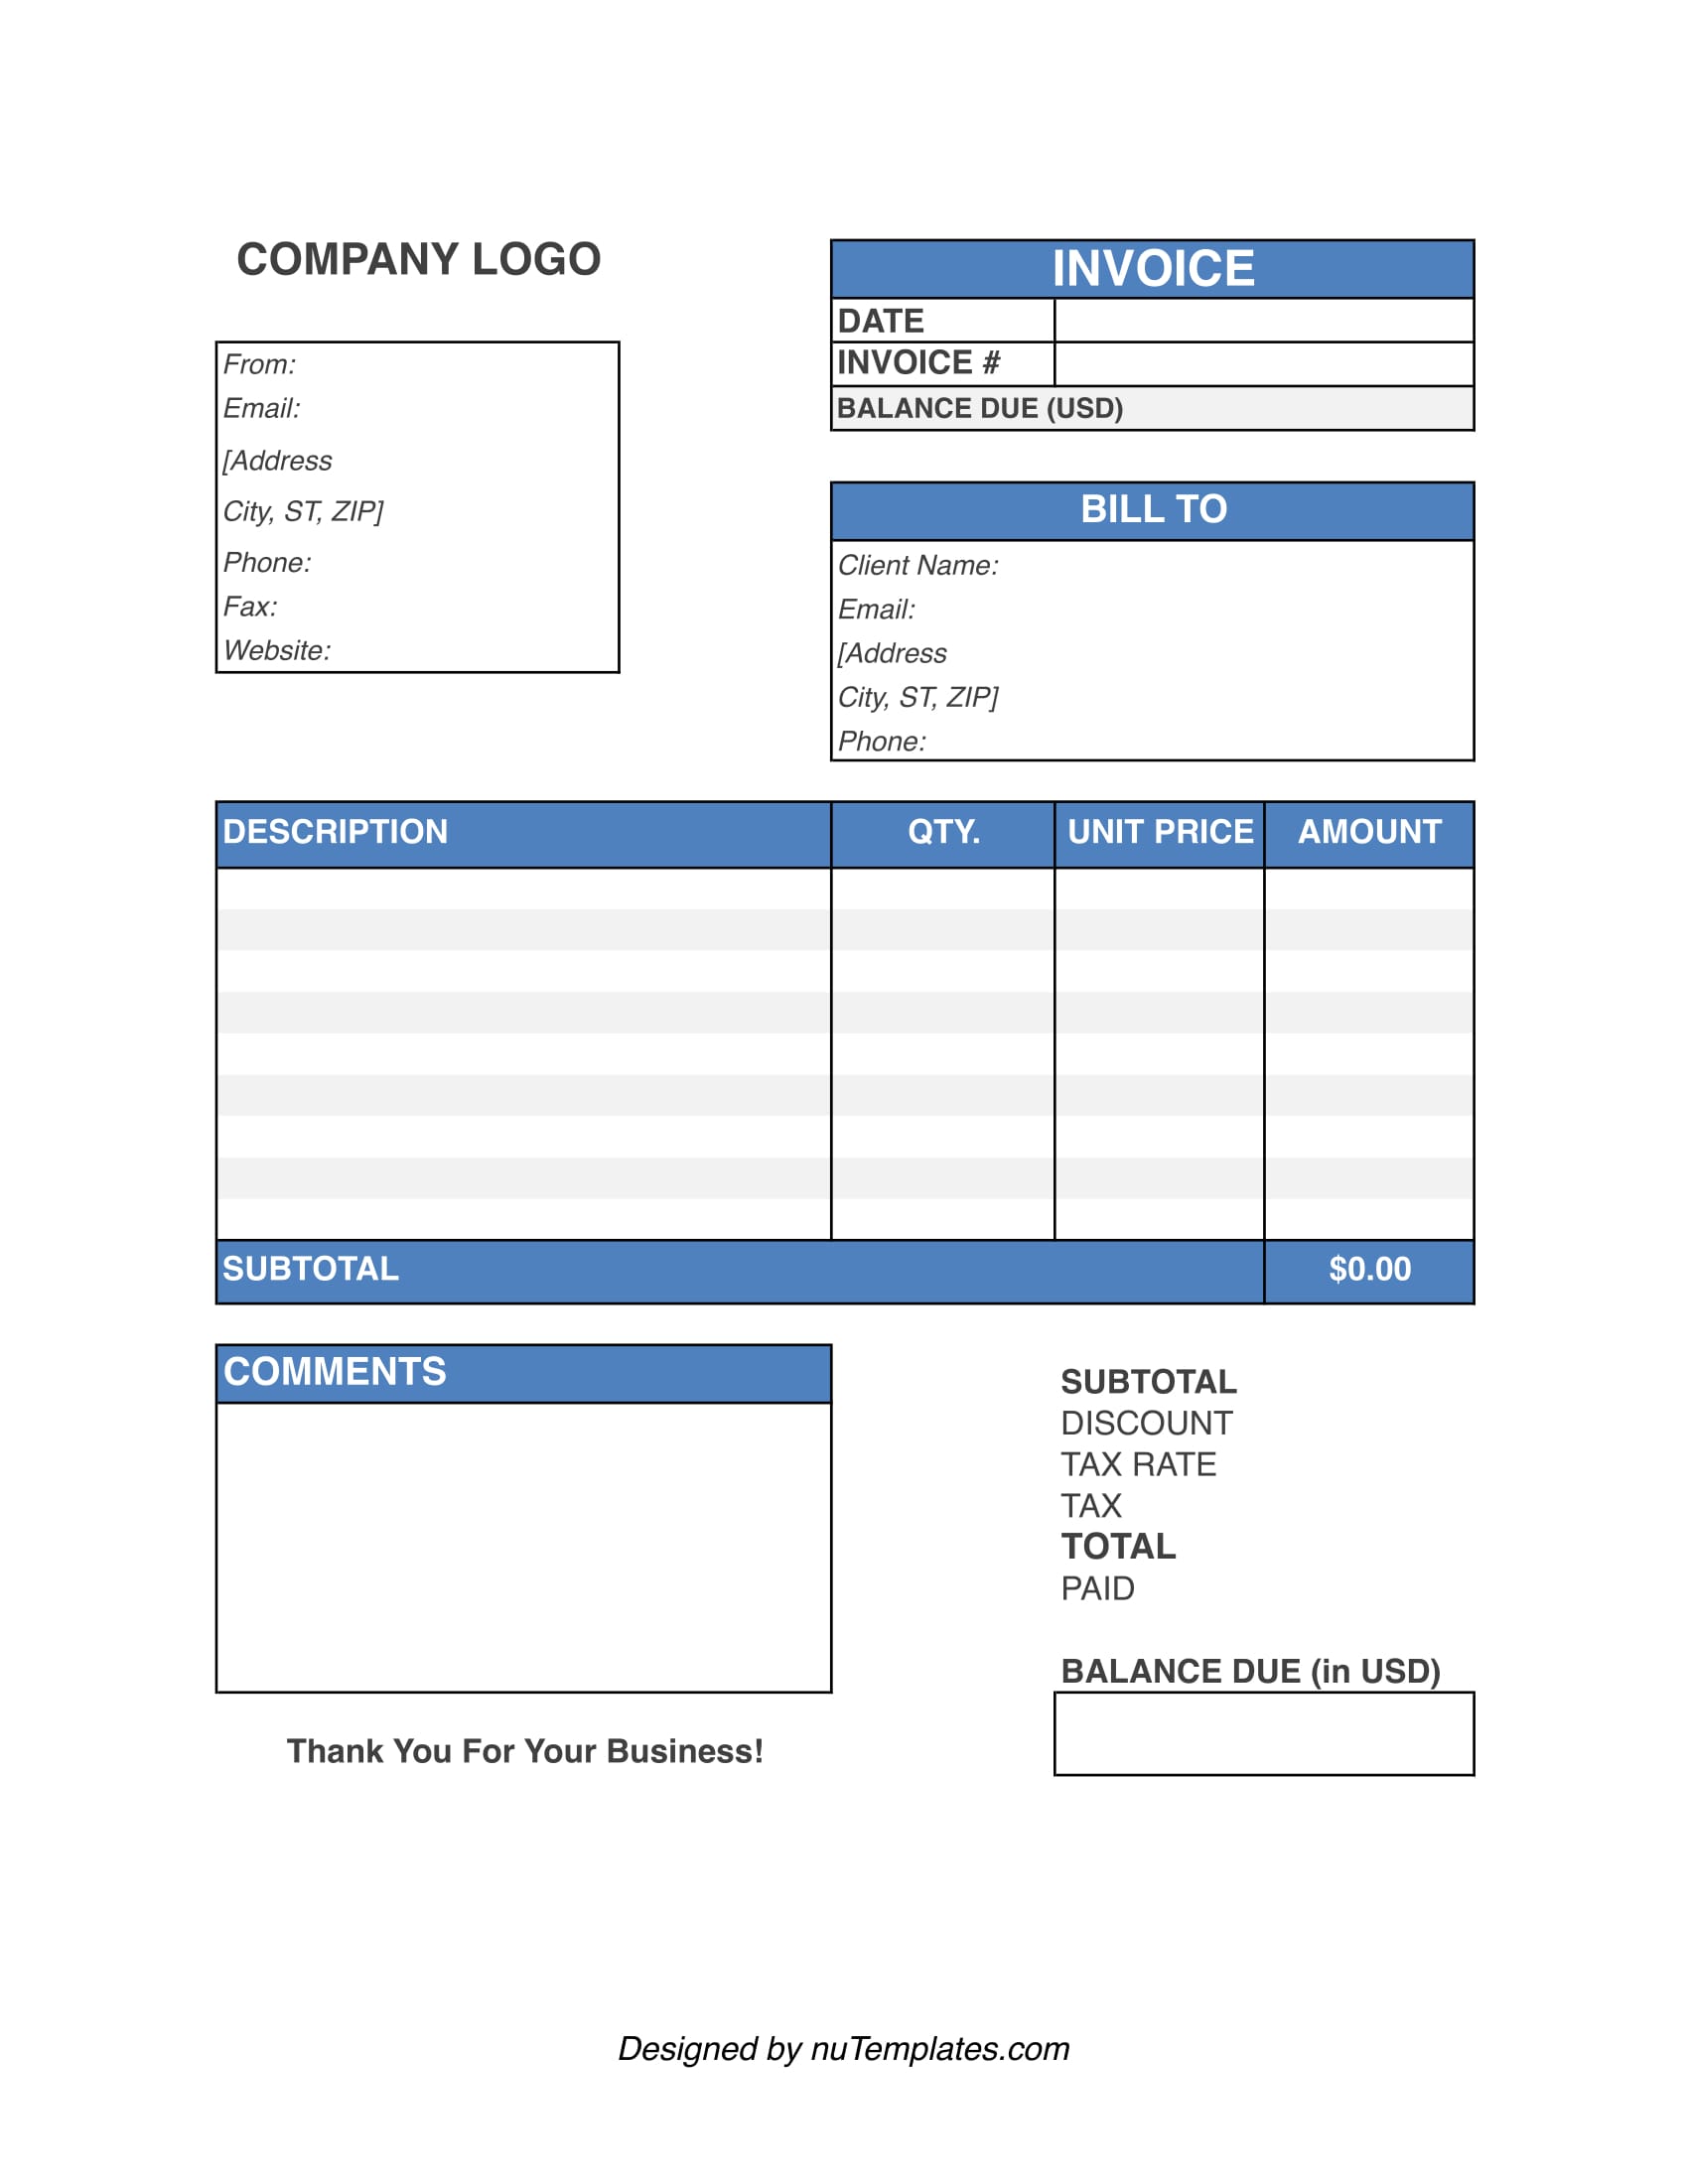 Cleaning Invoice Template Cleaning Invoices nuTemplates